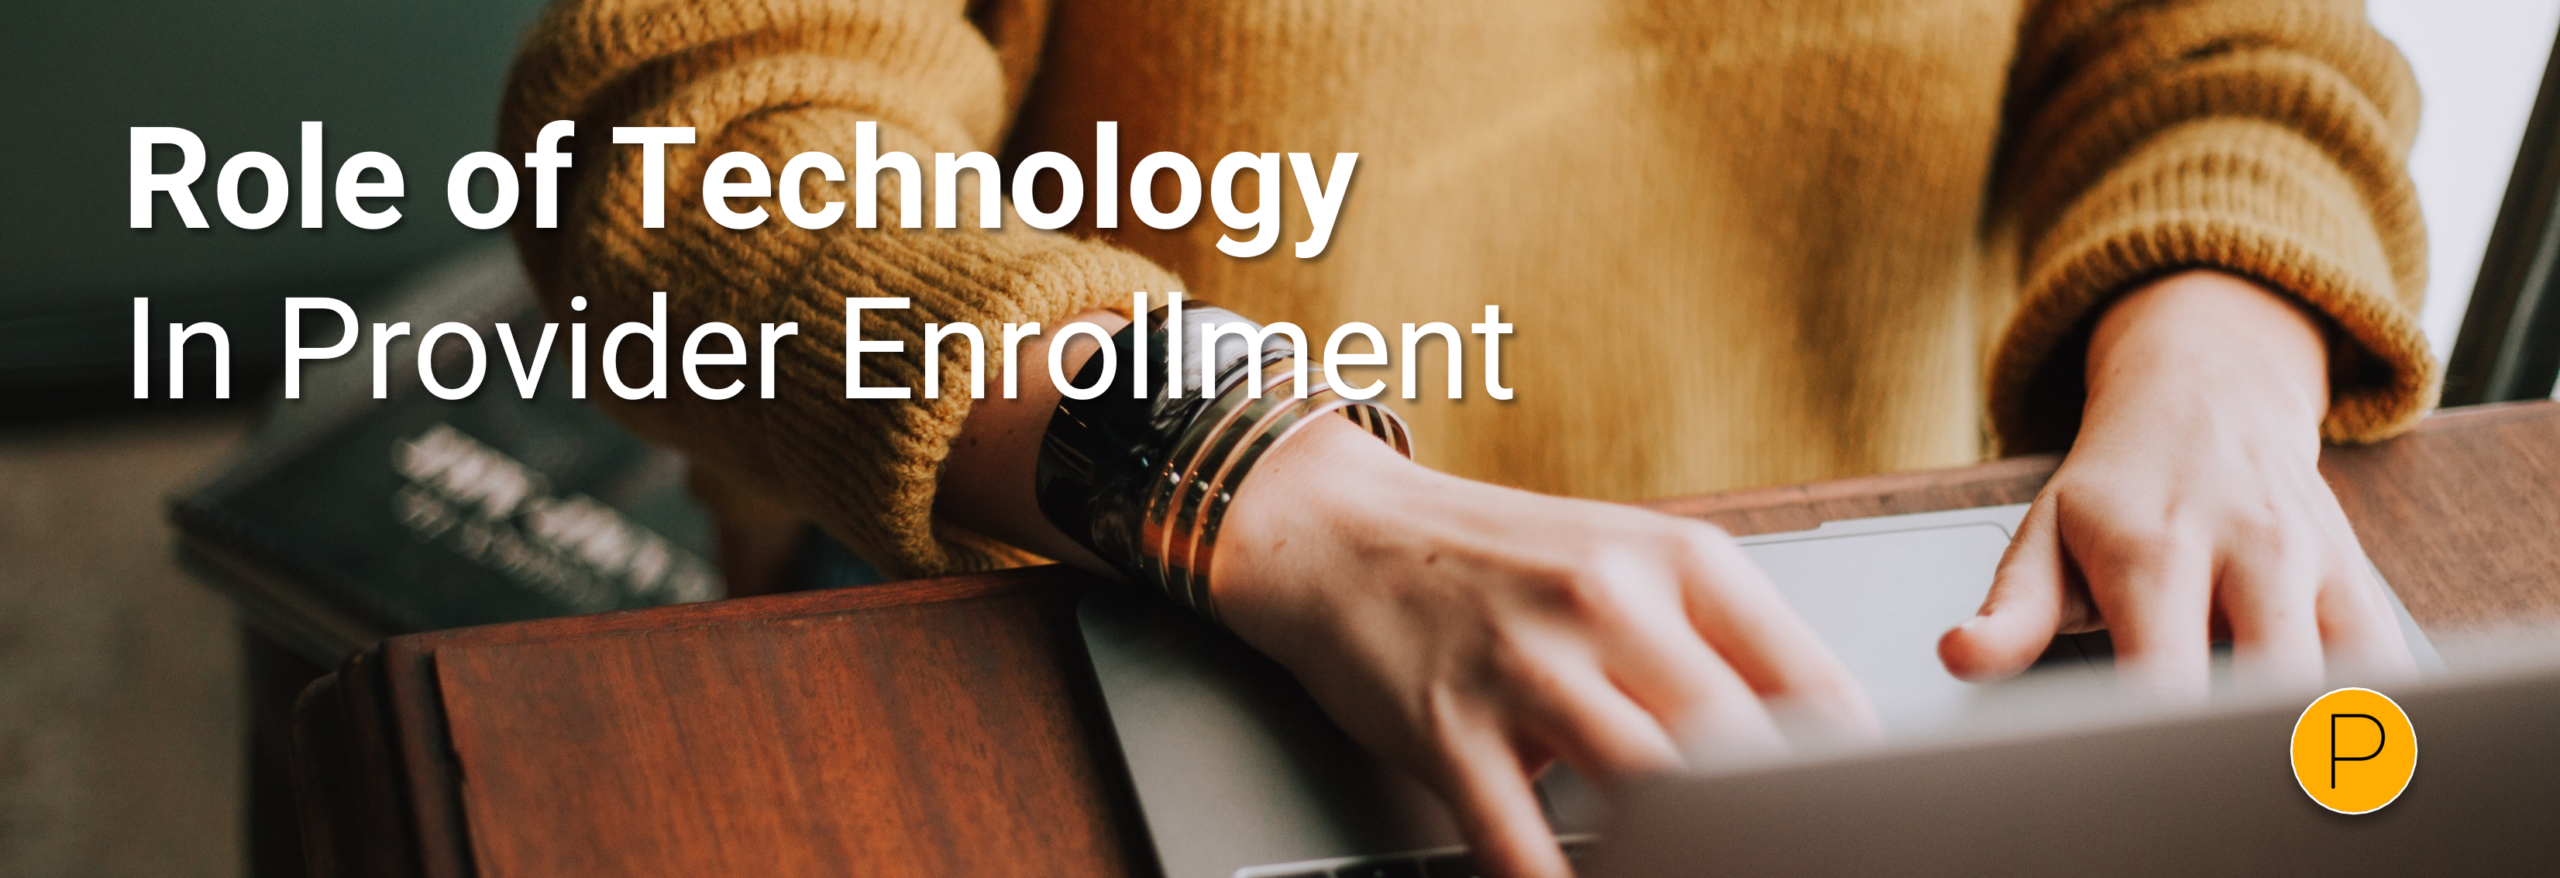 Role of Technology In Provider Enrollment